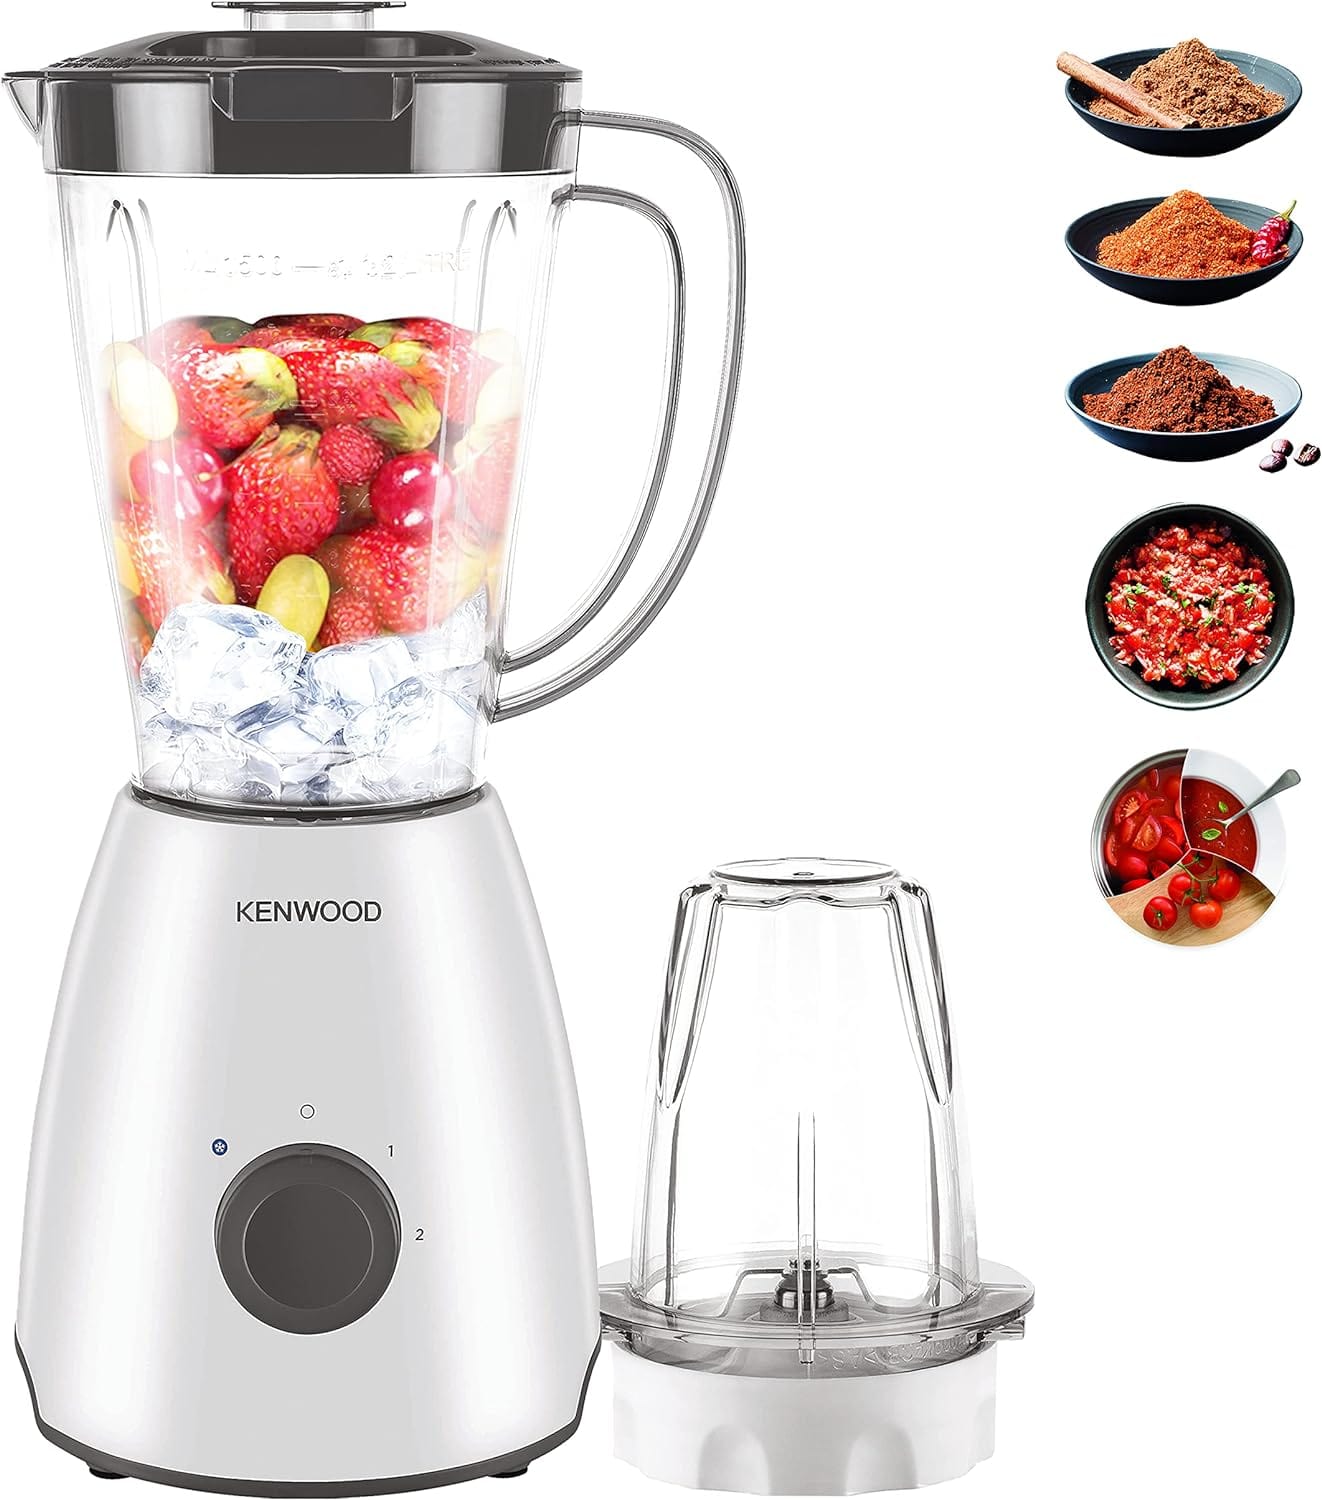 Kenwood 2L Stand Blender 400W - BLP10EO | Supply Master Accra, Ghana Kitchen Appliances Buy Tools hardware Building materials